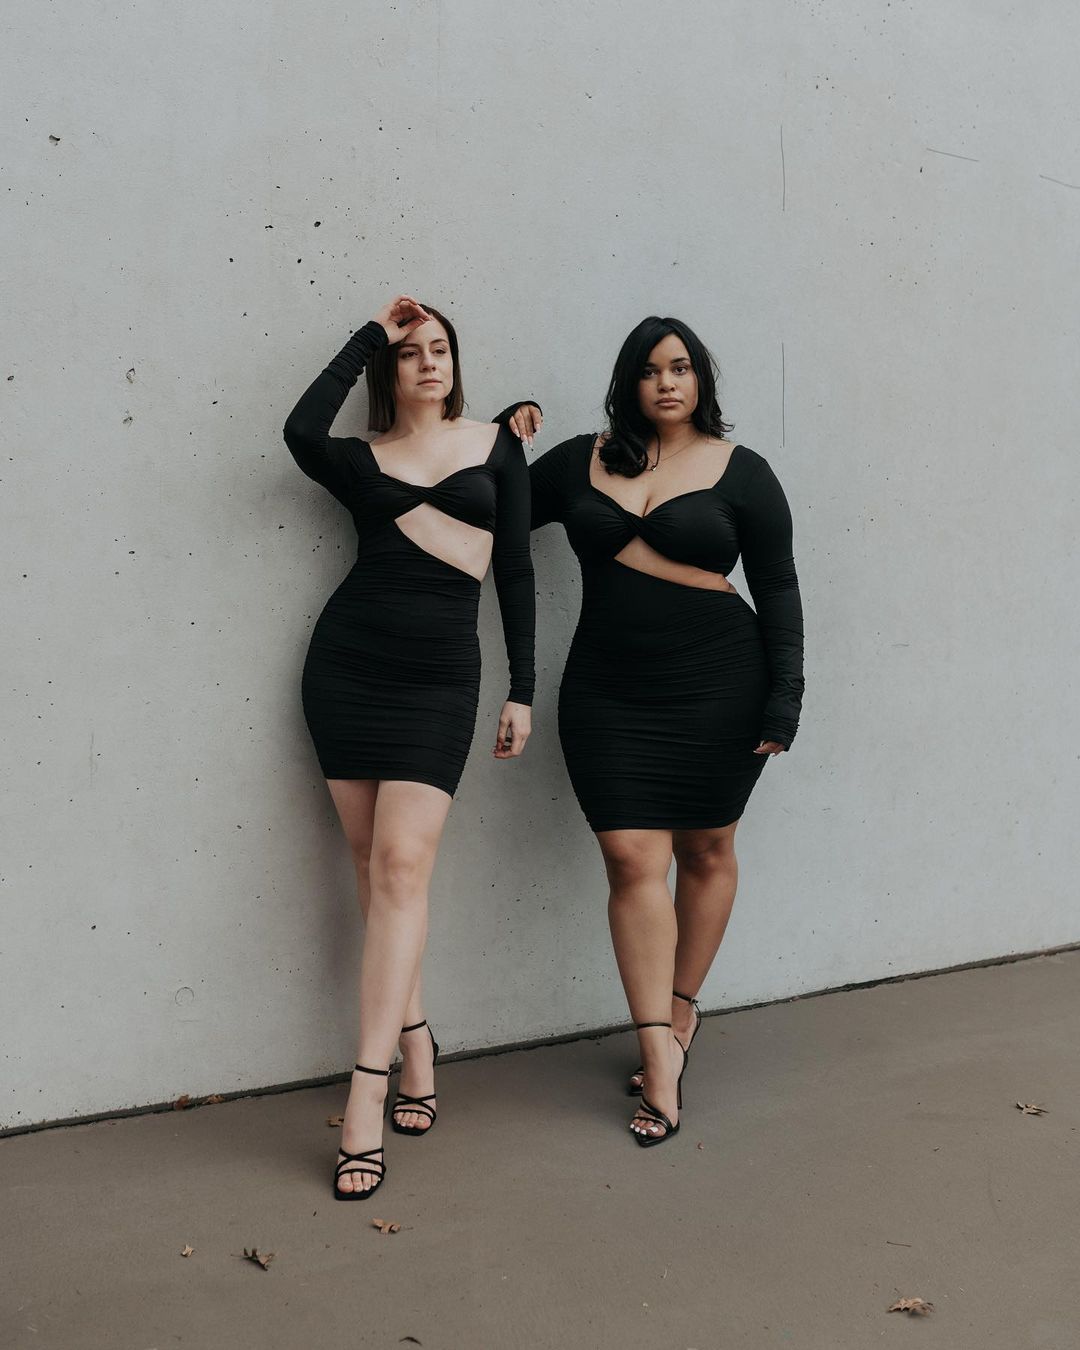 Body Positive Denise Mercedes and Maria Castellanos | Dress to Impress: Two Friends Show that Style Shines on Every Body | Herbeauty